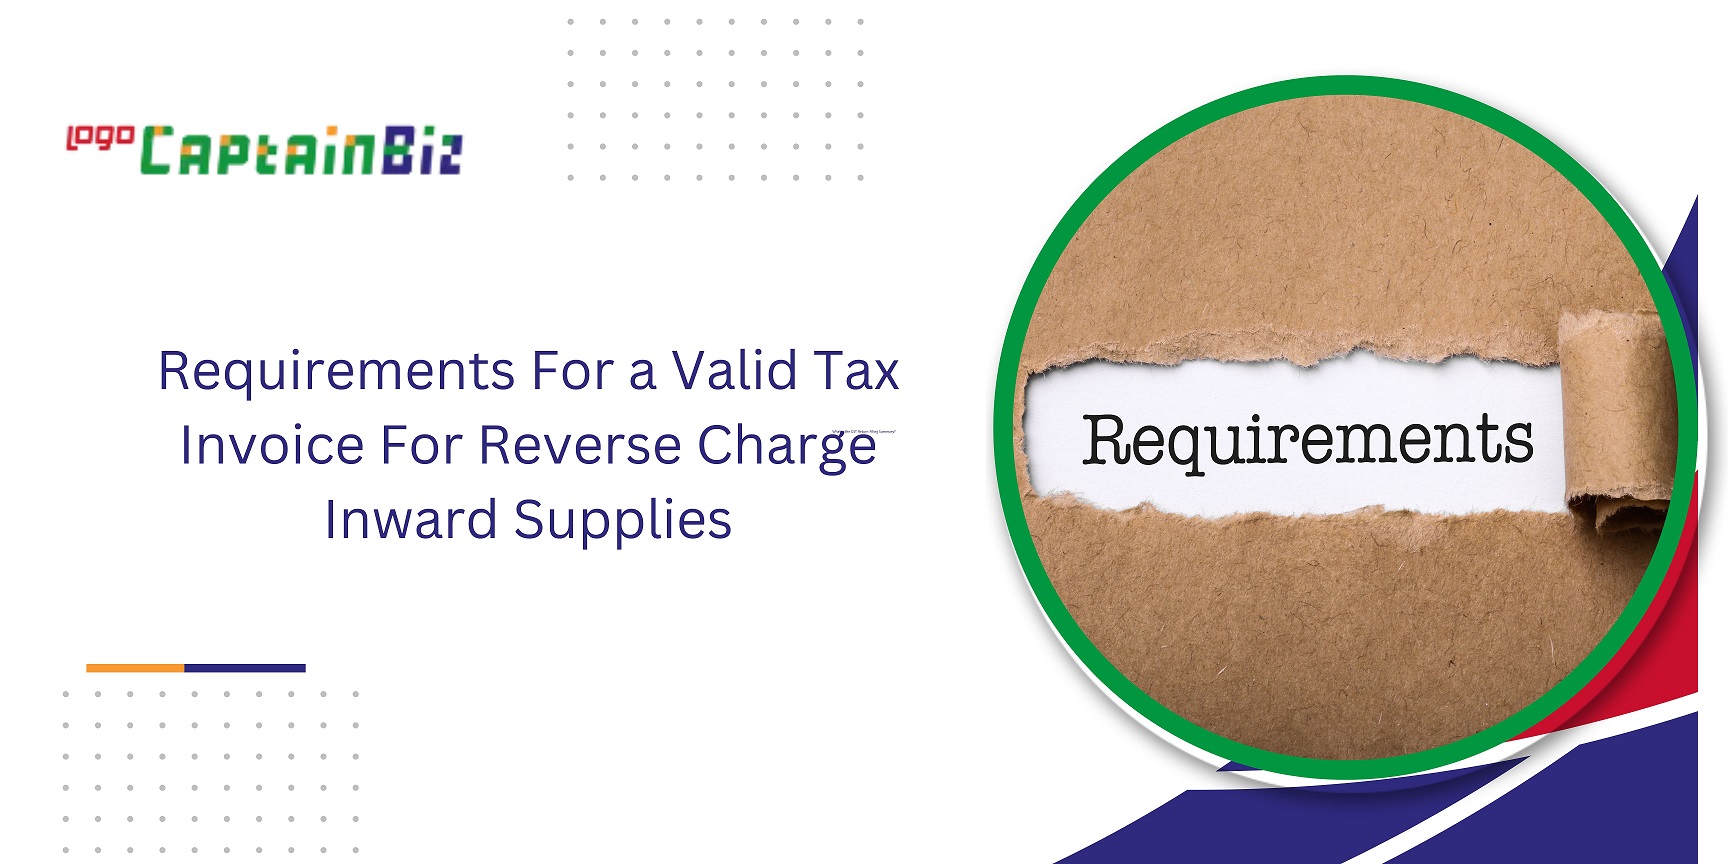 CaptainBiz:requirements for a valid tax invoice for reverse charge inward supplies